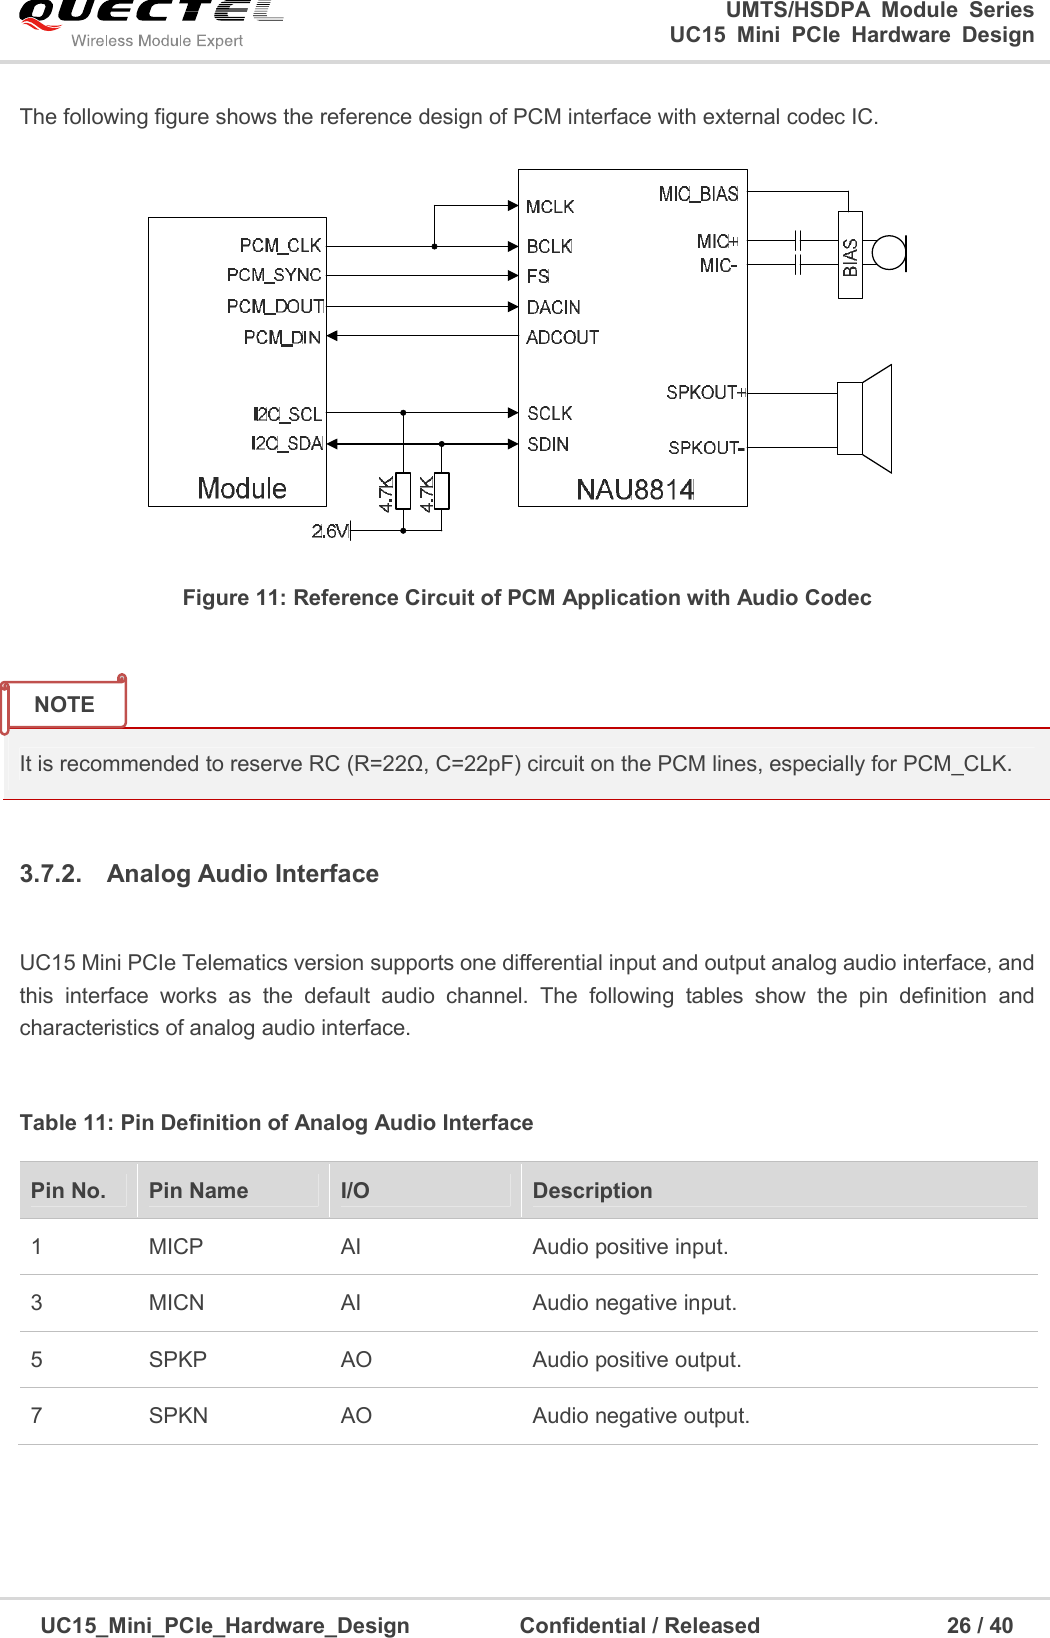                                                                        UMTS/HSDPA  Module  Series                                                          UC15 Mini PCIe Hardware Design  UC15_Mini_PCIe_Hardware_Design                    Confidential / Released                                  26 / 40    The following figure shows the reference design of PCM interface with external codec IC.  Figure 11: Reference Circuit of PCM Application with Audio Codec   It is recommended to reserve RC (R=22Ω, C=22pF) circuit on the PCM lines, especially for PCM_CLK.  3.7.2.  Analog Audio Interface  UC15 Mini PCIe Telematics version supports one differential input and output analog audio interface, and this  interface  works  as  the  default  audio  channel.  The  following  tables  show  the  pin  definition  and characteristics of analog audio interface.  Table 11: Pin Definition of Analog Audio Interface    Pin No.  Pin Name  I/O    Description 1  MICP  AI  Audio positive input. 3  MICN  AI  Audio negative input. 5  SPKP  AO  Audio positive output. 7  SPKN  AO  Audio negative output. NOTE 